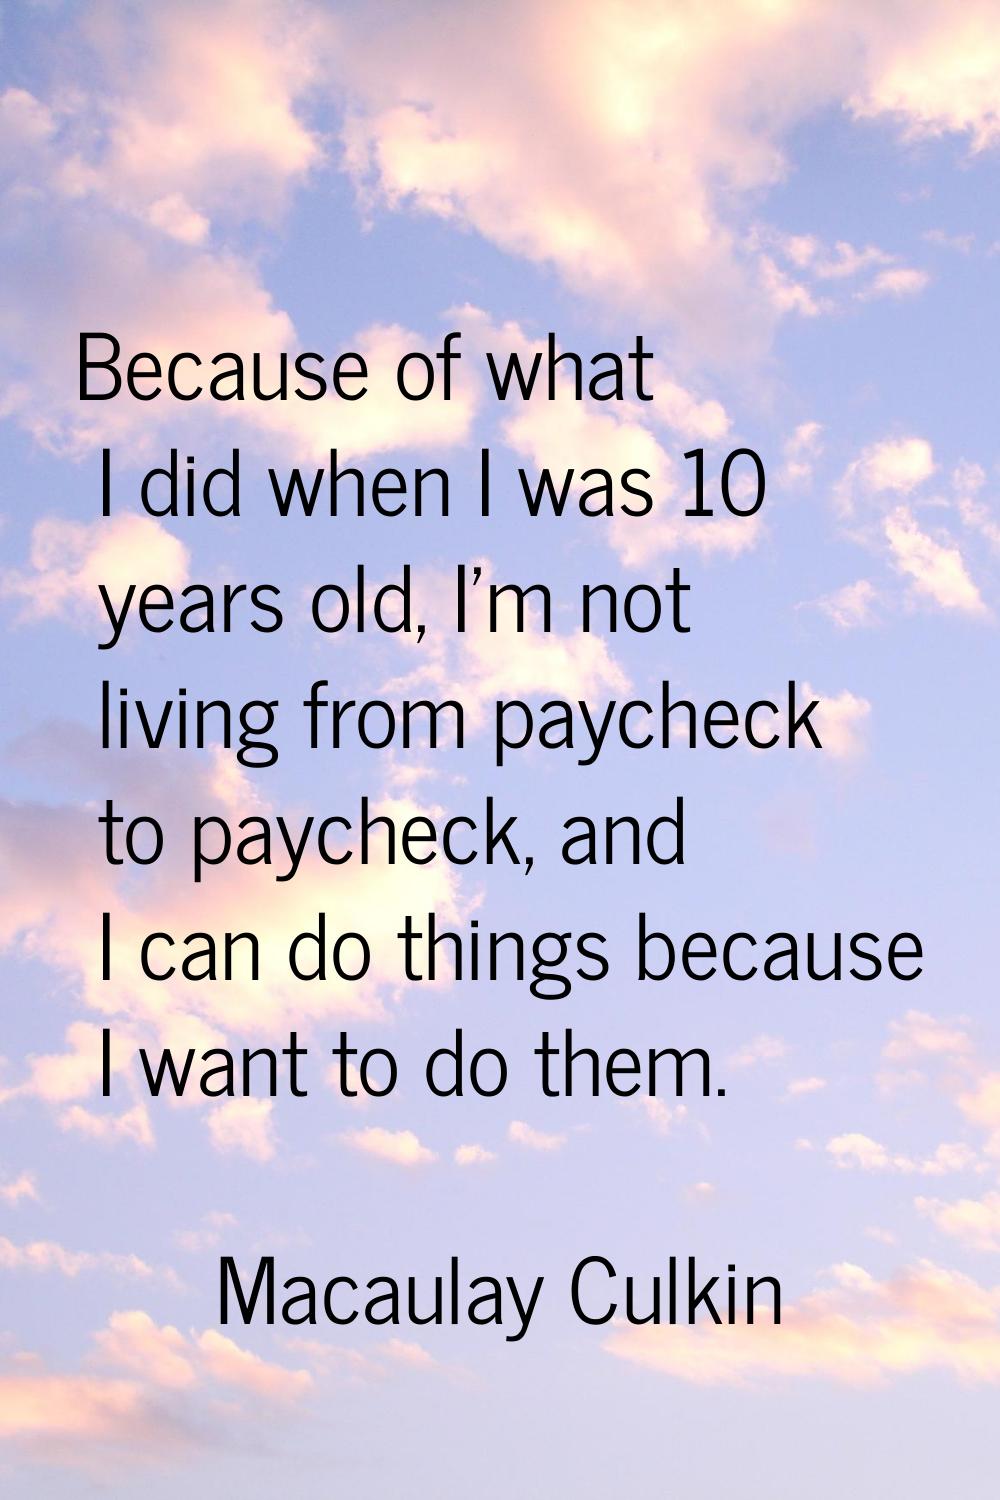 Because of what I did when I was 10 years old, I'm not living from paycheck to paycheck, and I can 